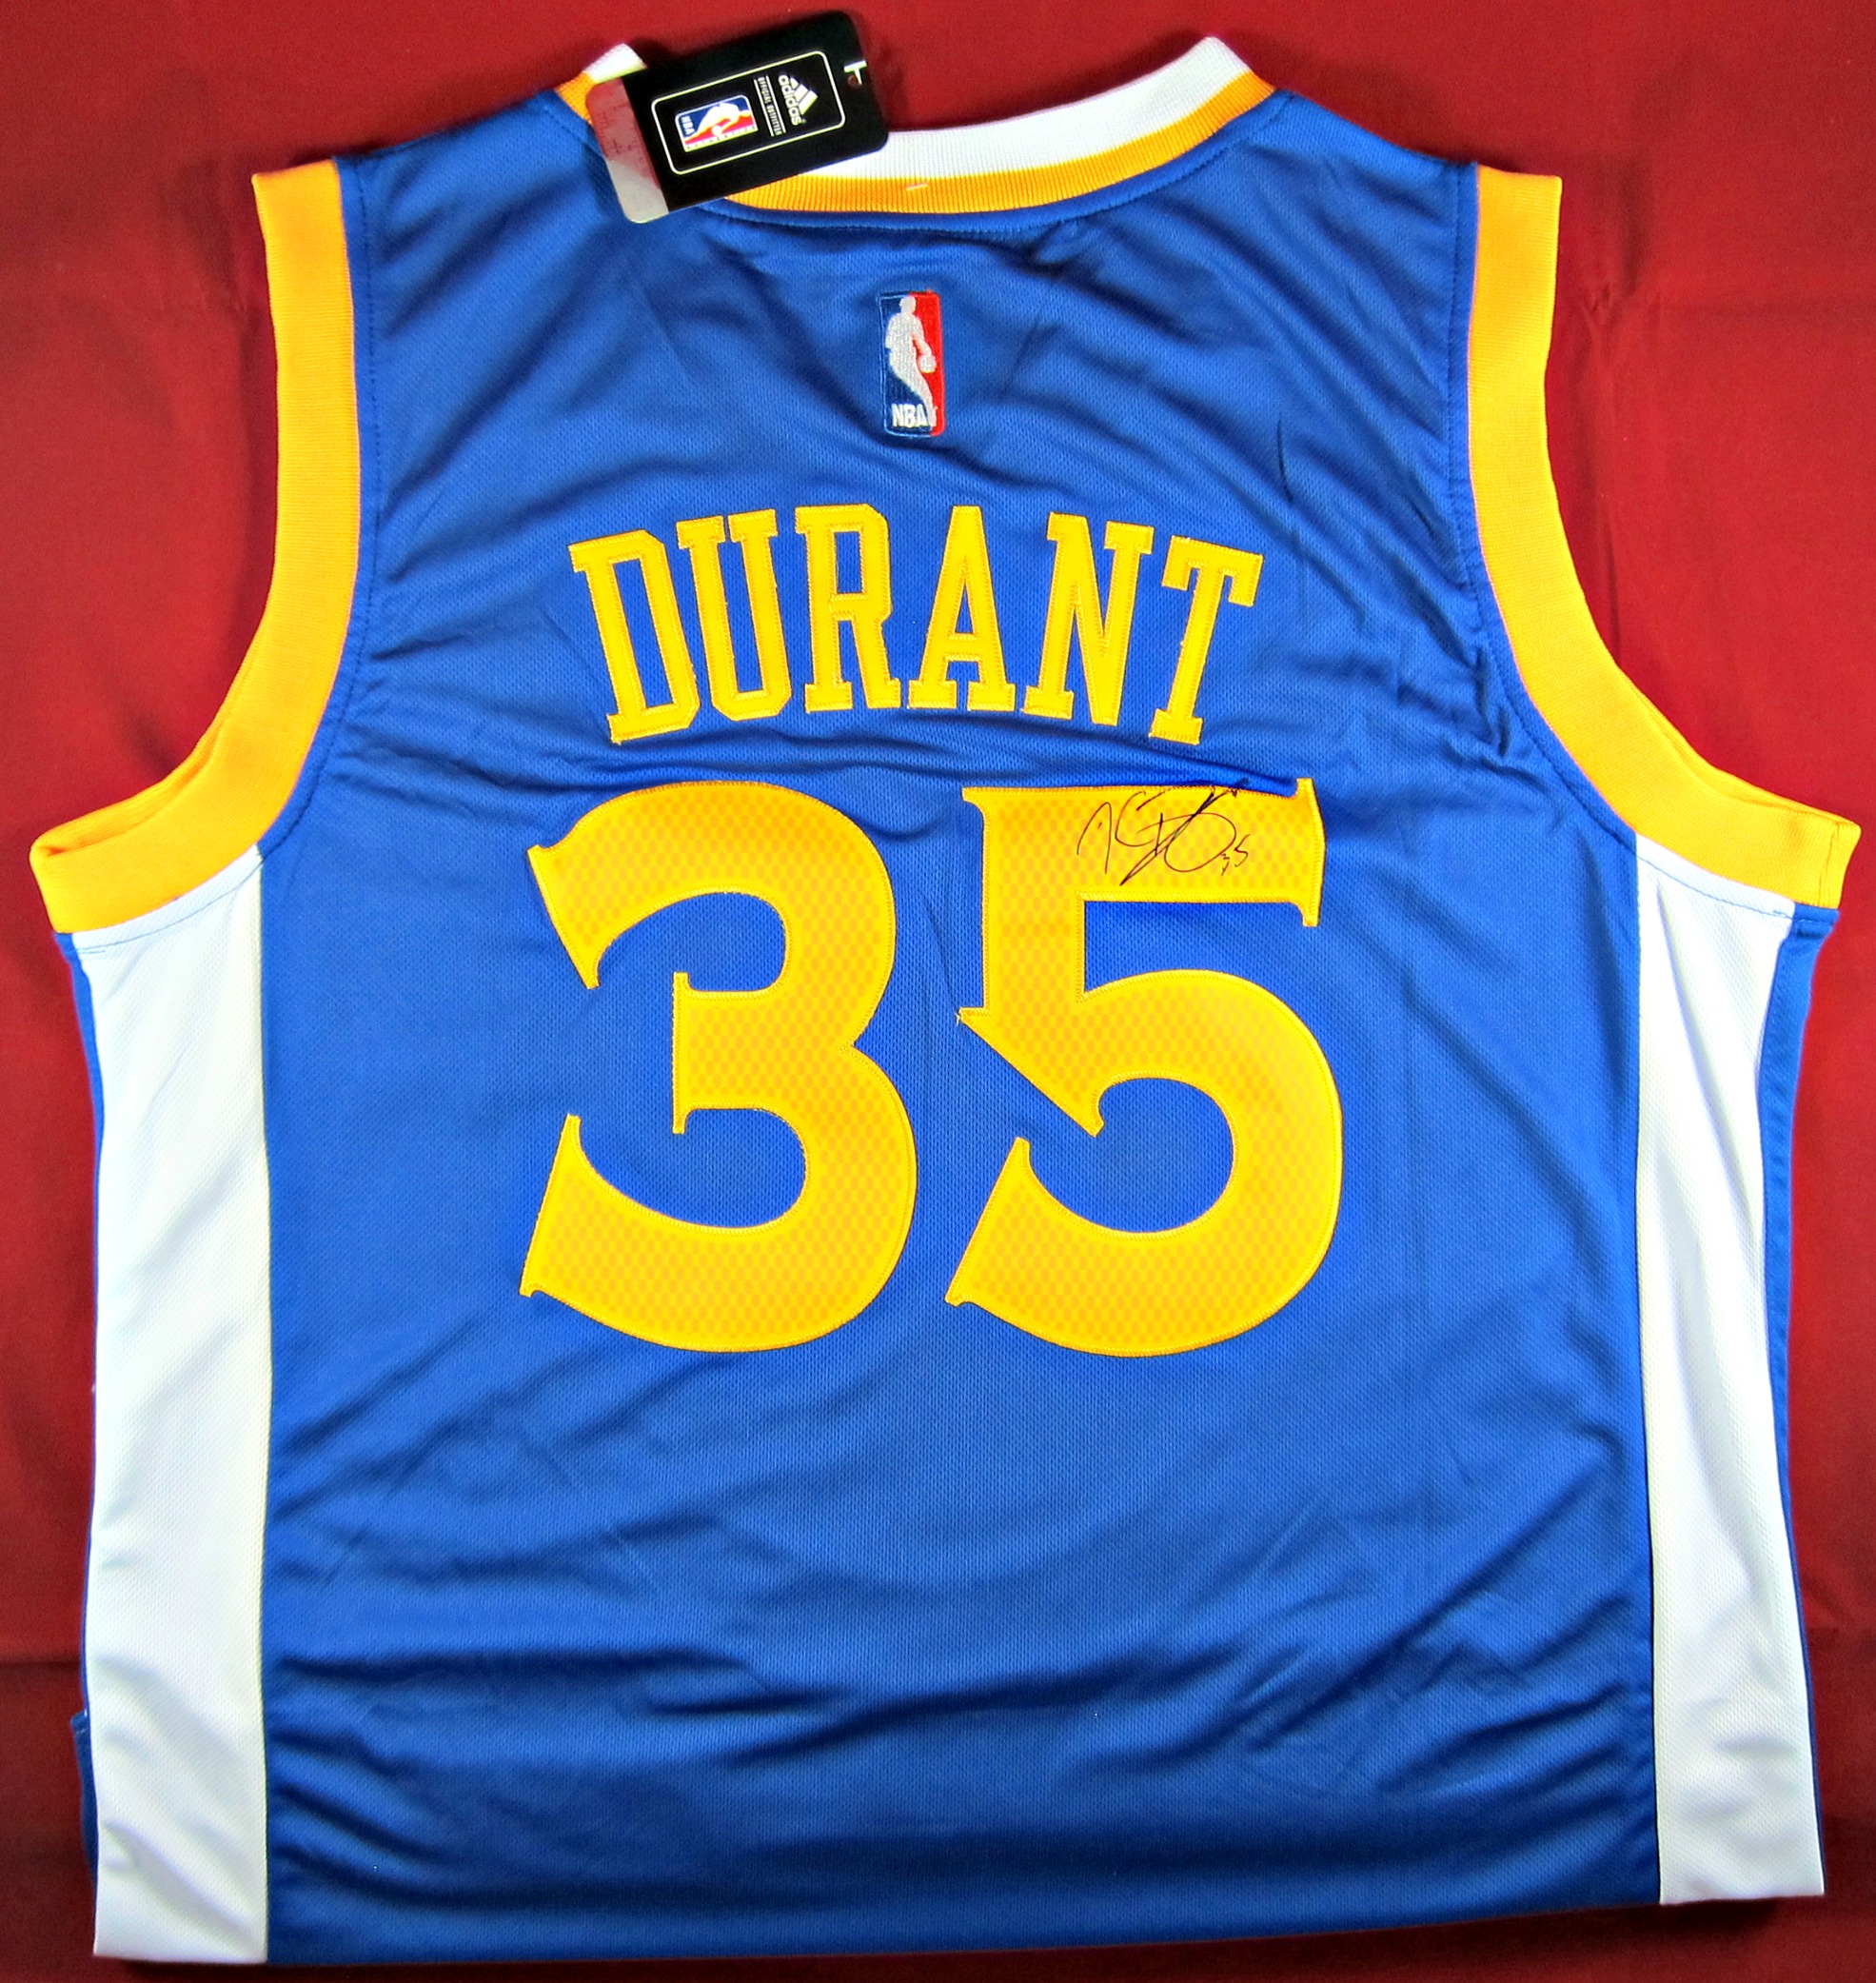 kevin durant tee